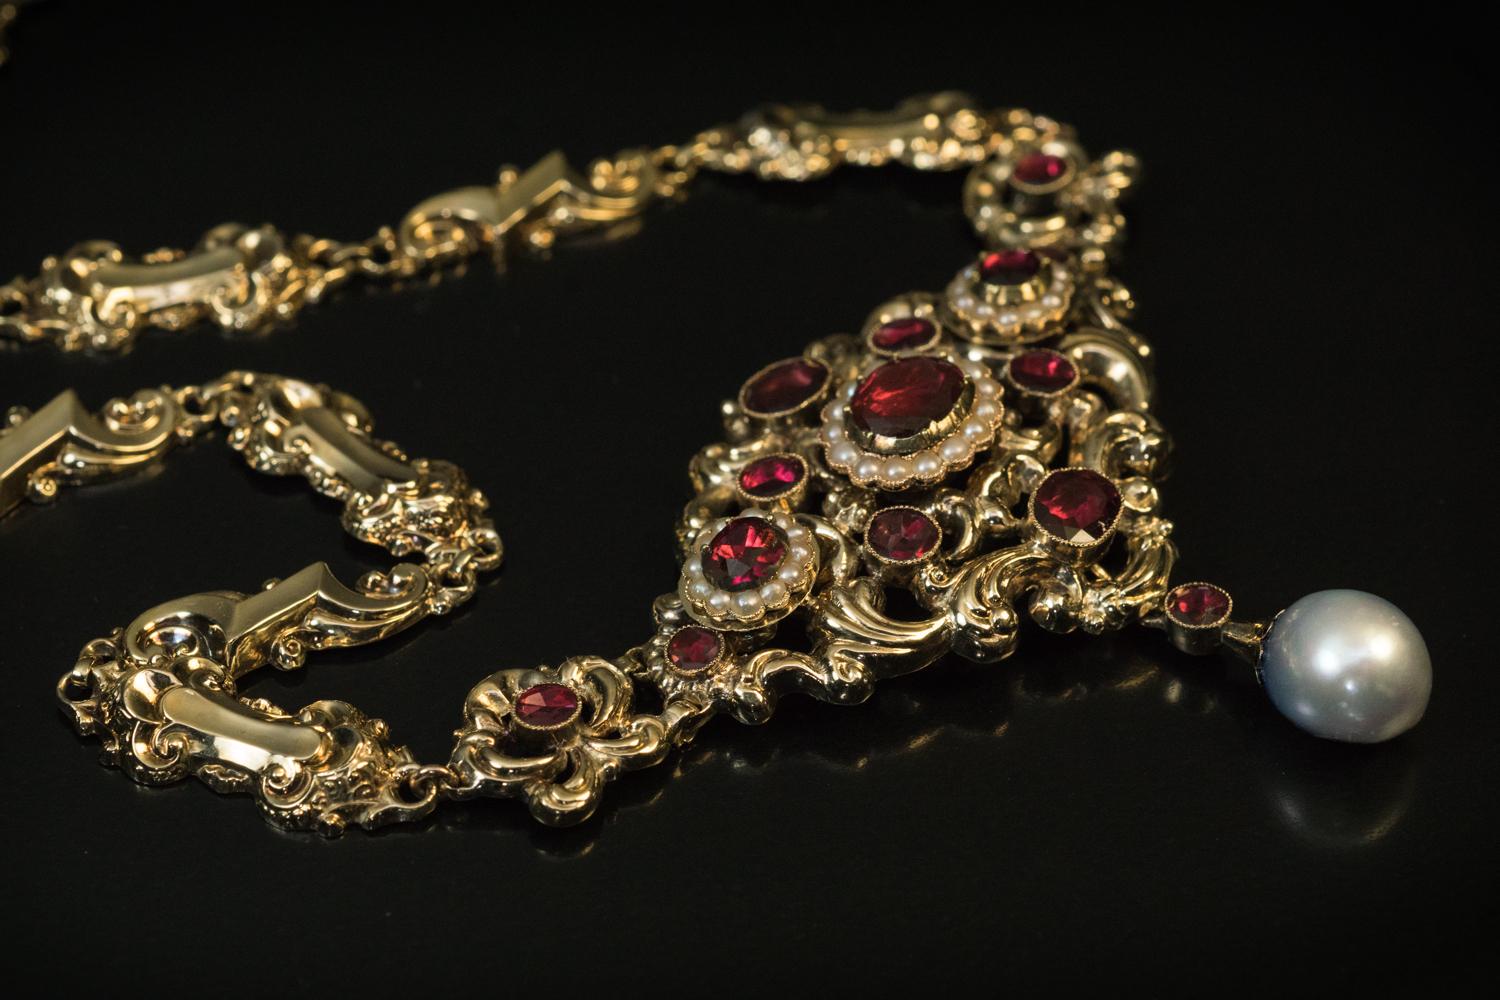 Circa 1880

This striking 19th century hollow gold necklace is designed in the Renaissance style of the 1500s – early 1600s. The necklace is crafted in 14K gold and embellished with garnets and pearls. The semi-baroque shape pearl measures 10 x 9.48